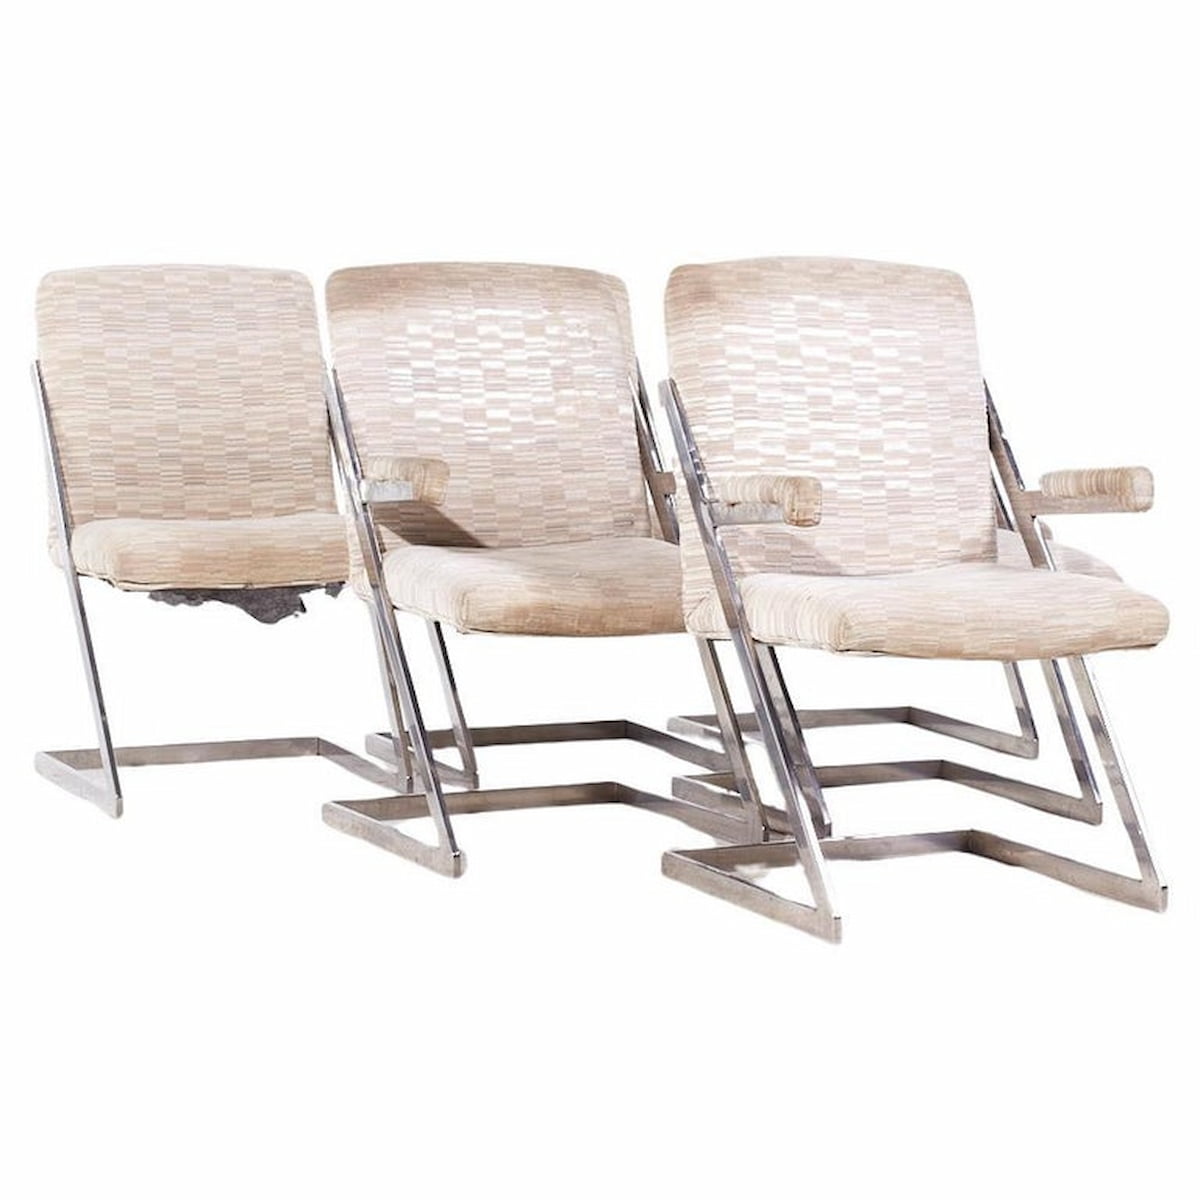 Milo Baughman Style Dia Mid Century Chrome Cantilever Z Dining Chairs - Set of 6